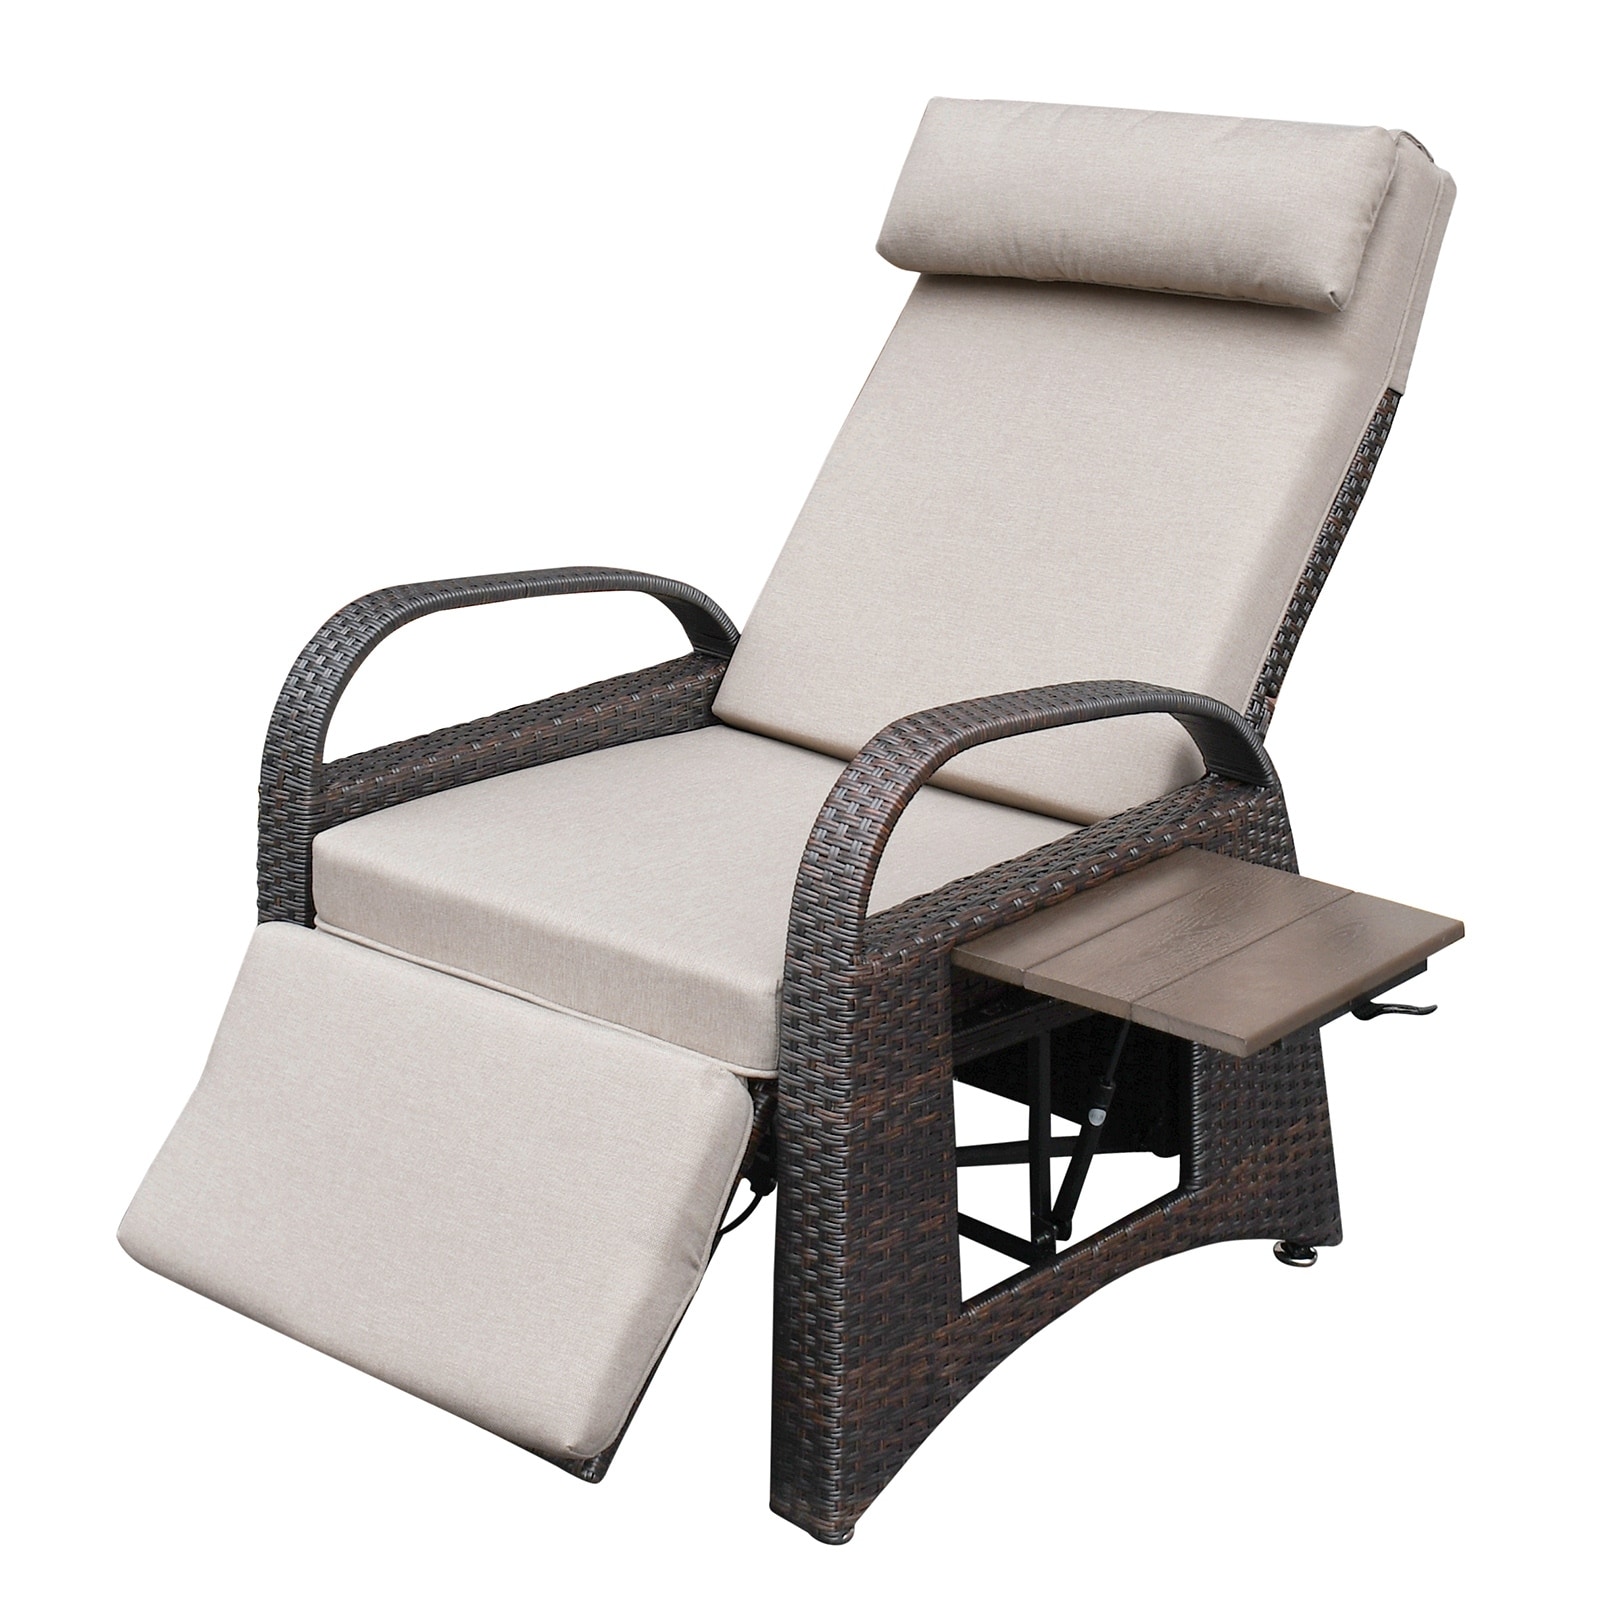 https://ak1.ostkcdn.com/images/products/is/images/direct/d3d68be9ada9056ff342848186d793054bc44006/Outdoor-Recliner-Chair%2C-PE-Wicker-Adjustable-Reclining-Lounge-Chair-and-Removable-Soft-Cushion%2C-with-Armchair-and-Ergonomic.jpg